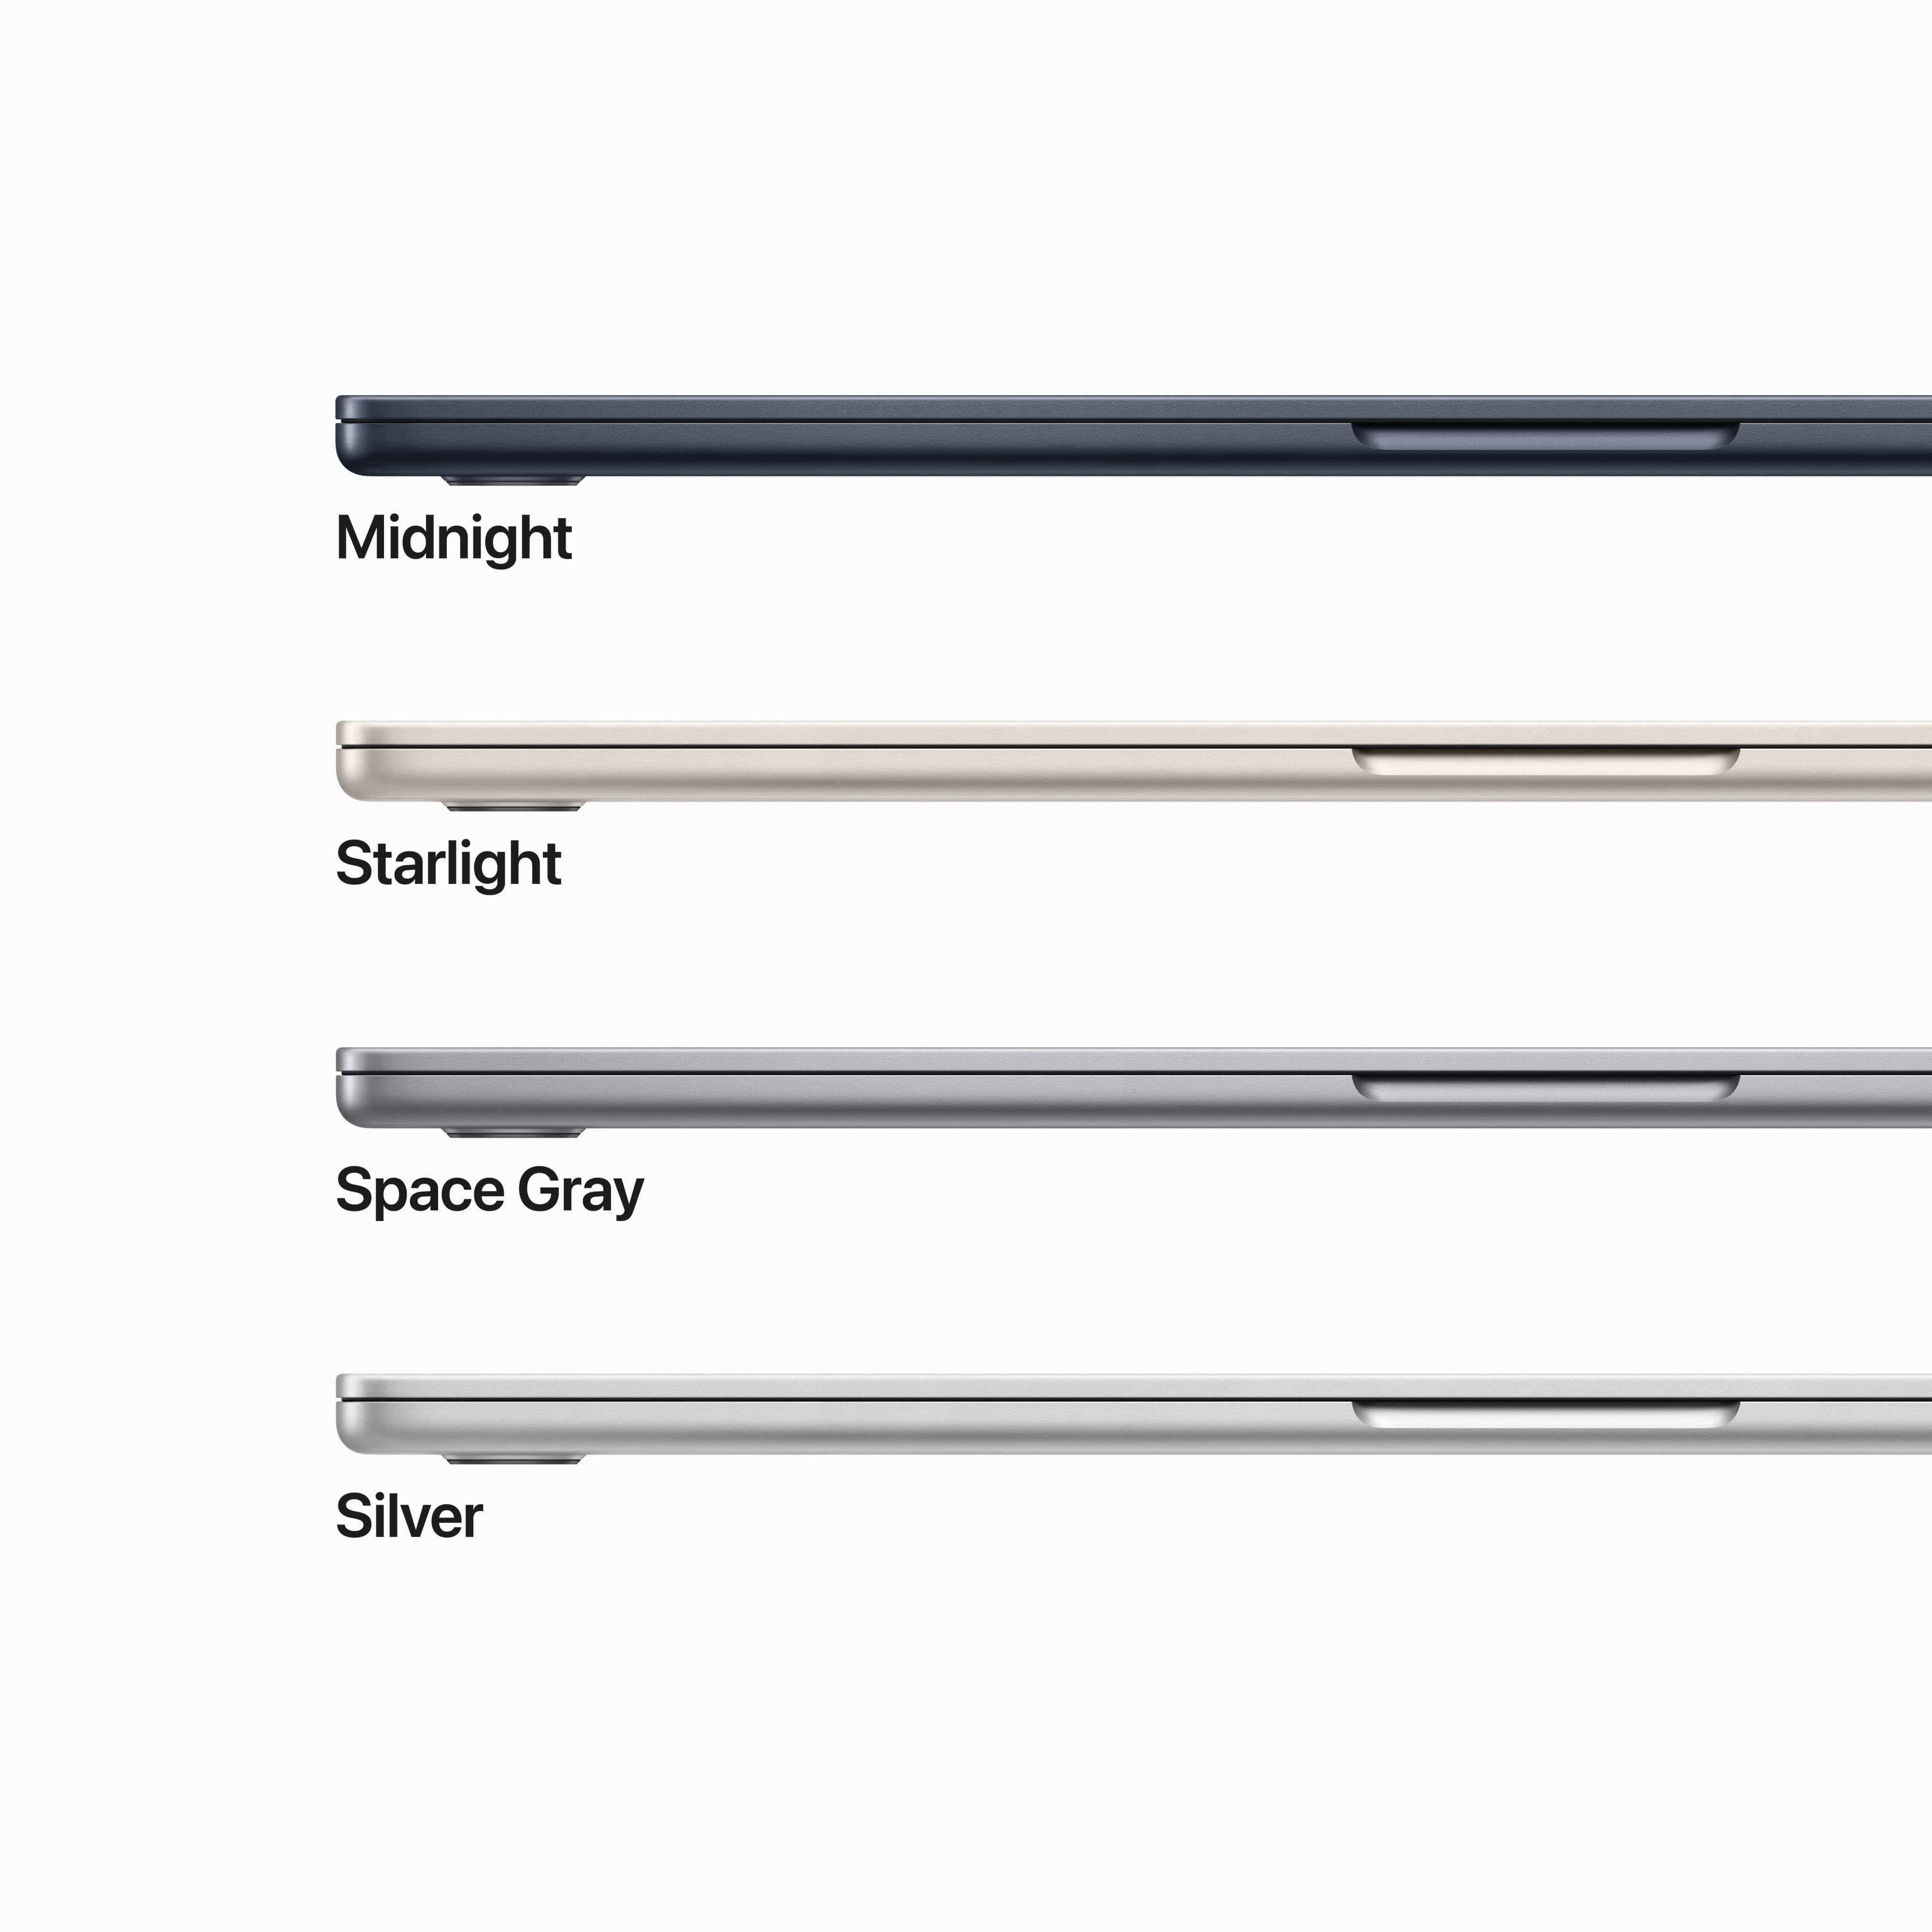 '15-inch MacBook Air: Apple M2 chip with 8-core CPU and 10-core GPU 256GB - Starlight  מחשב אייקון  נייד'